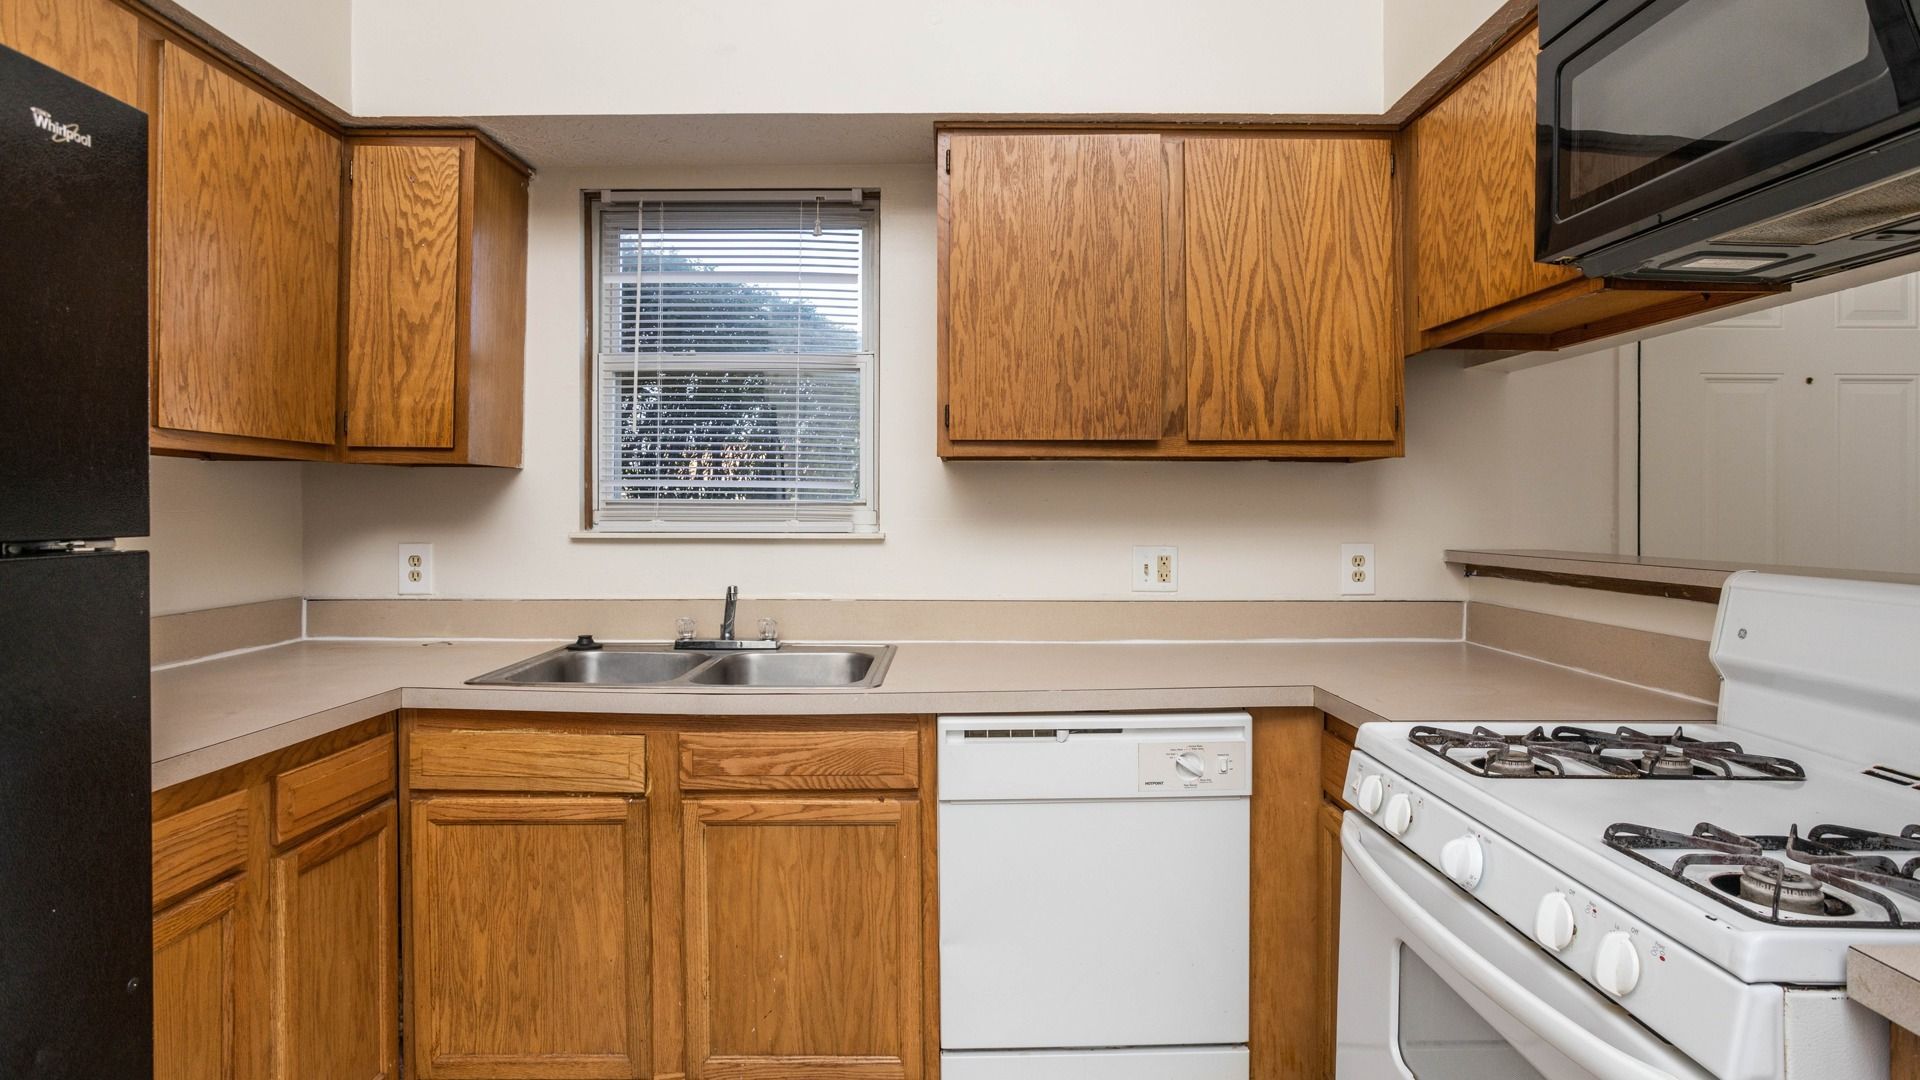 A kitchen with wooden cabinets , a stove , dishwasher , refrigerator and microwave.